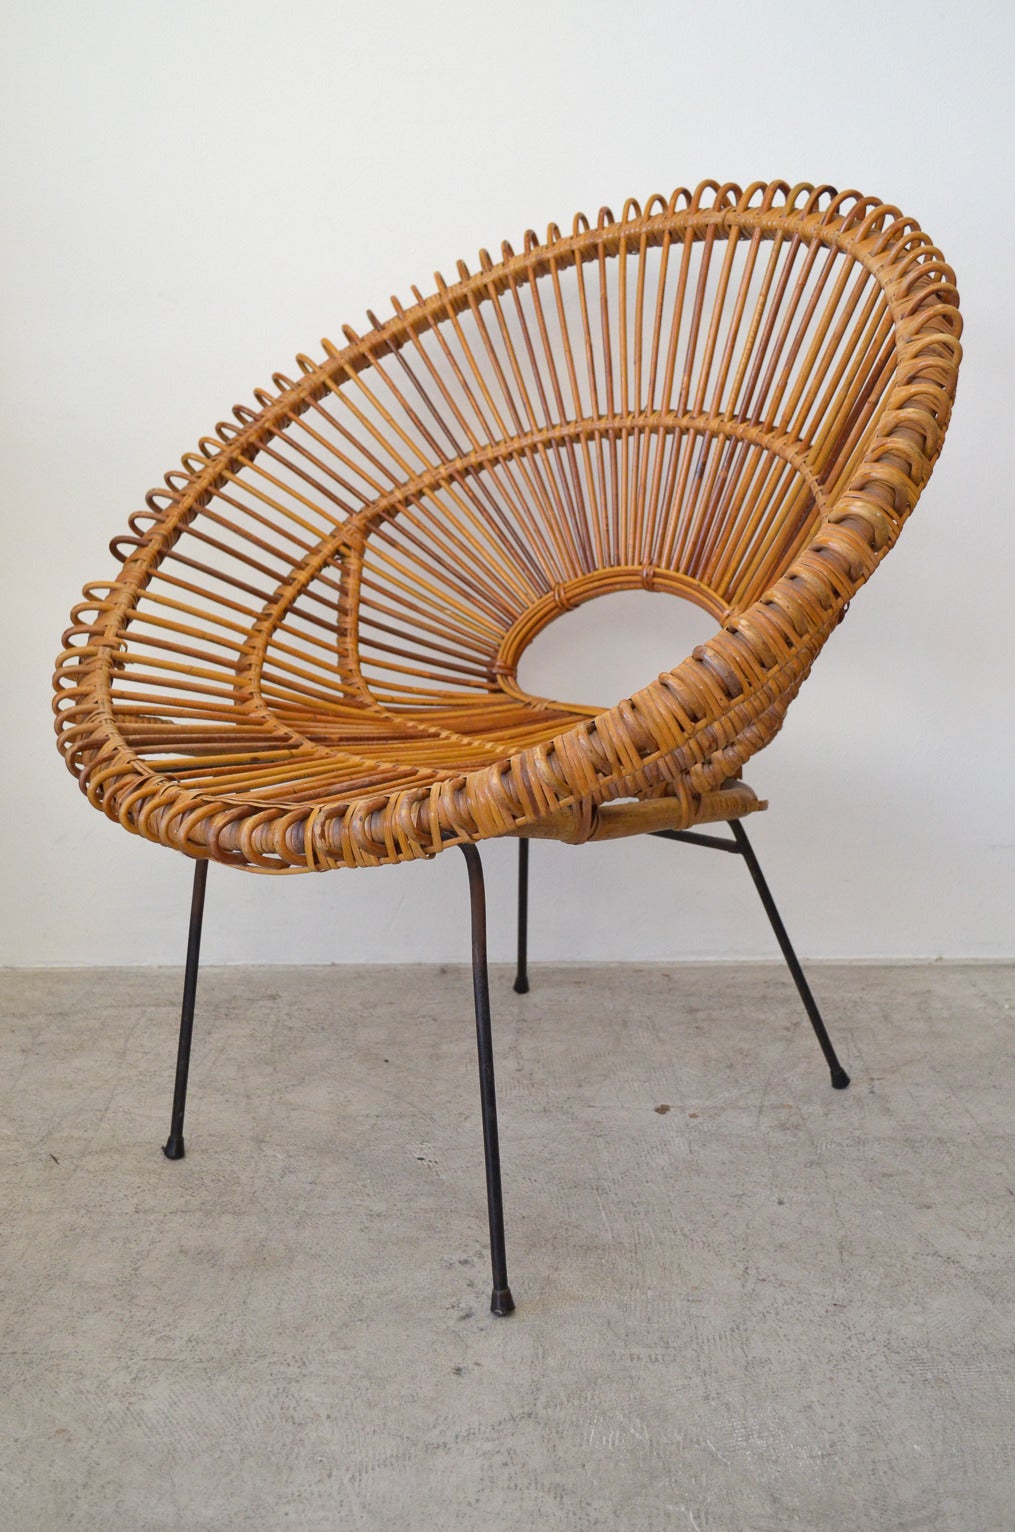 Rattan and Iron Hoop Chair Attributed to Janine Abraham and Dirk Jan Rol 1